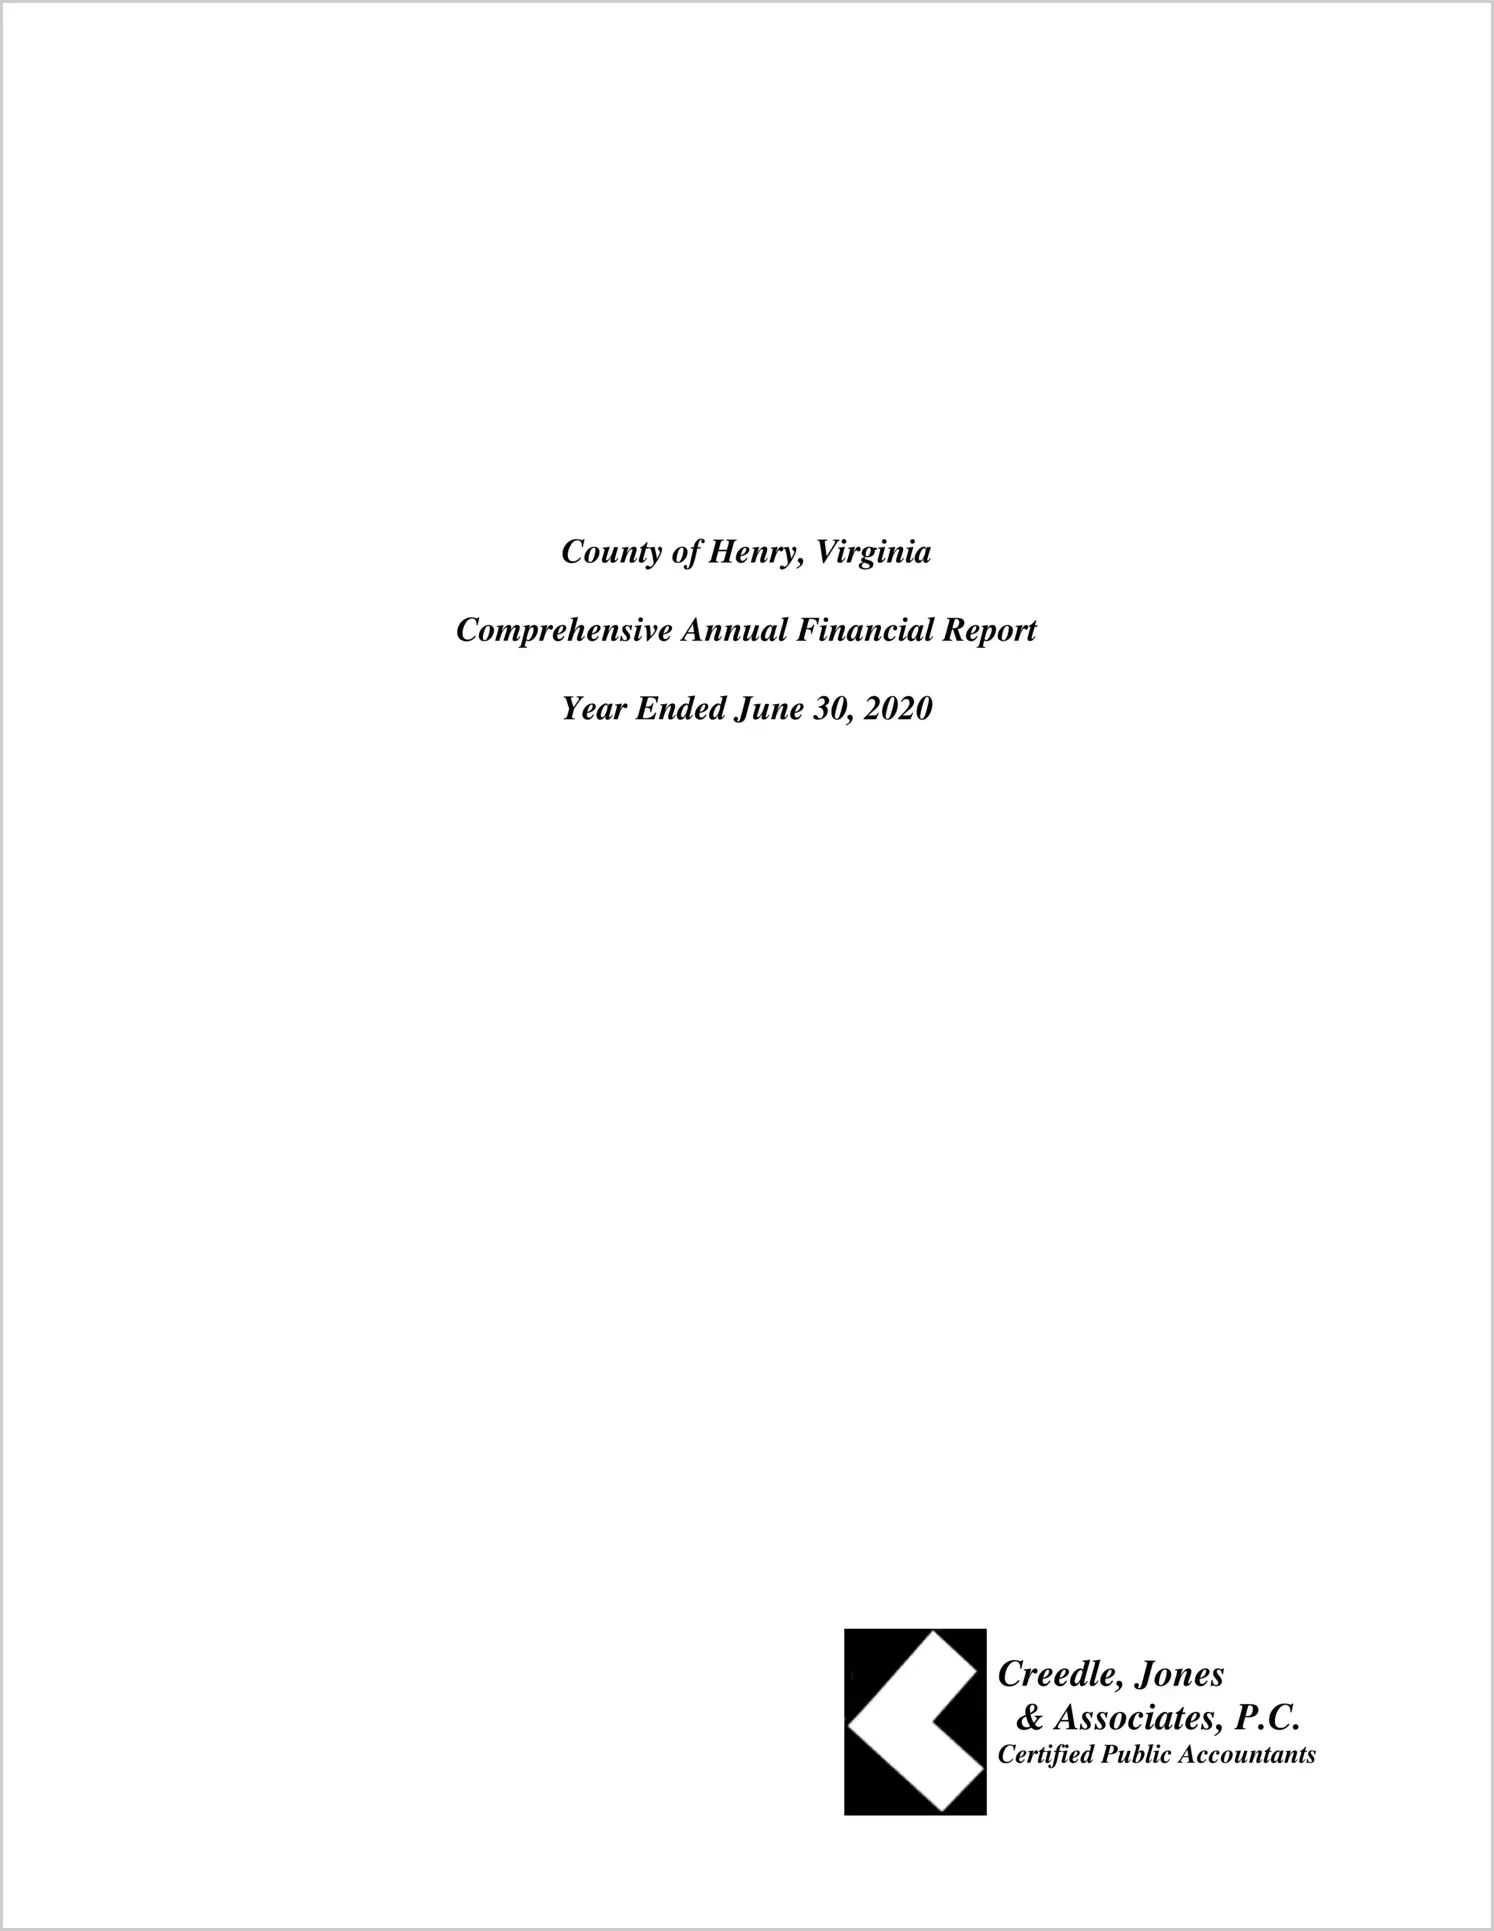 2020 Annual Financial Report for County of Henry